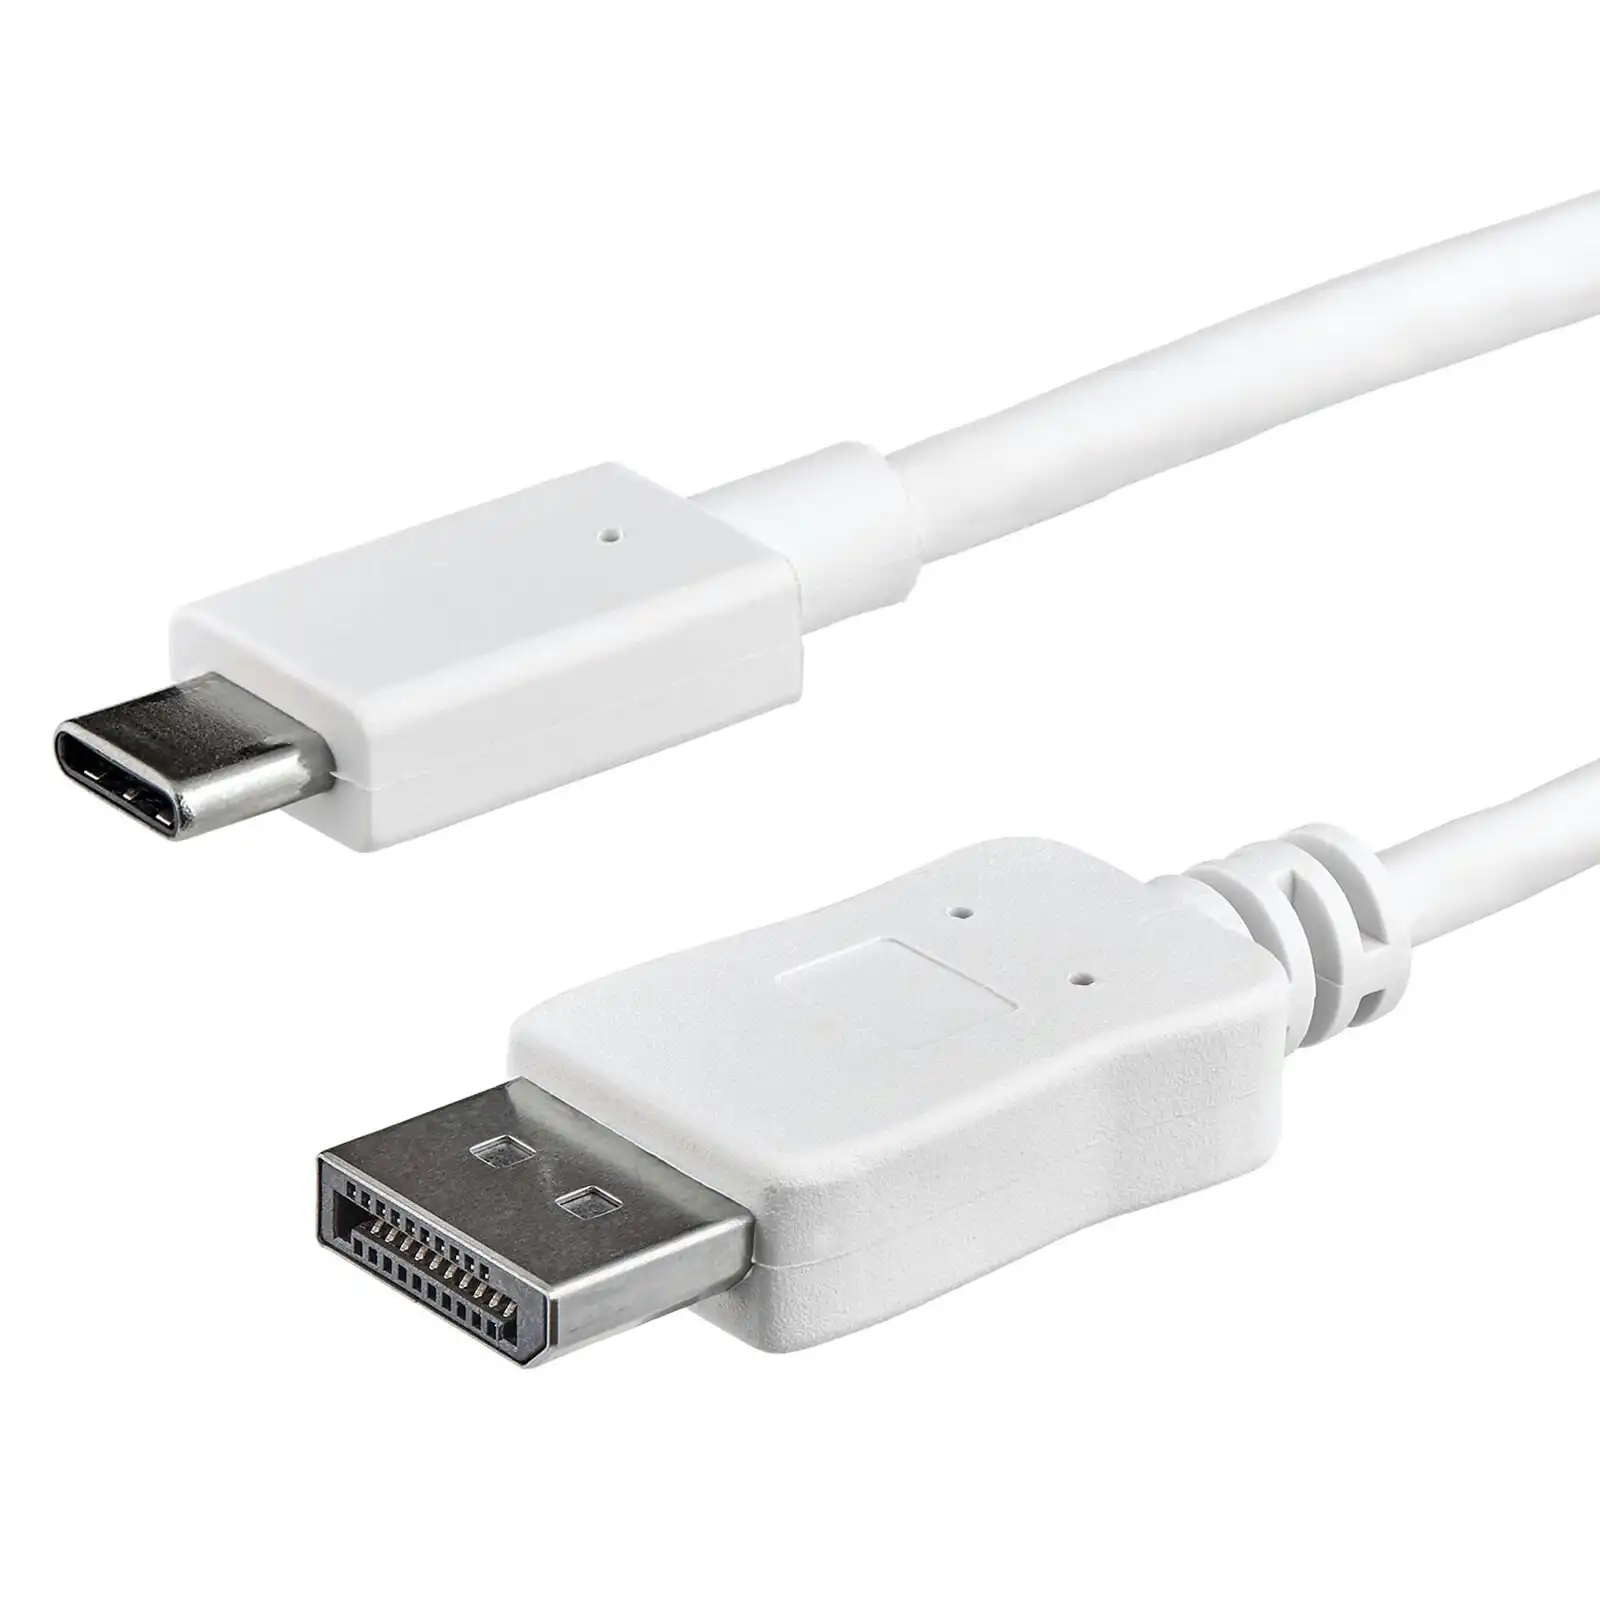 Star Tech 1m USB C To DisplayPort 1.2 Cable 4K/60Hz 21.6Gbps WHT For Windows/Mac